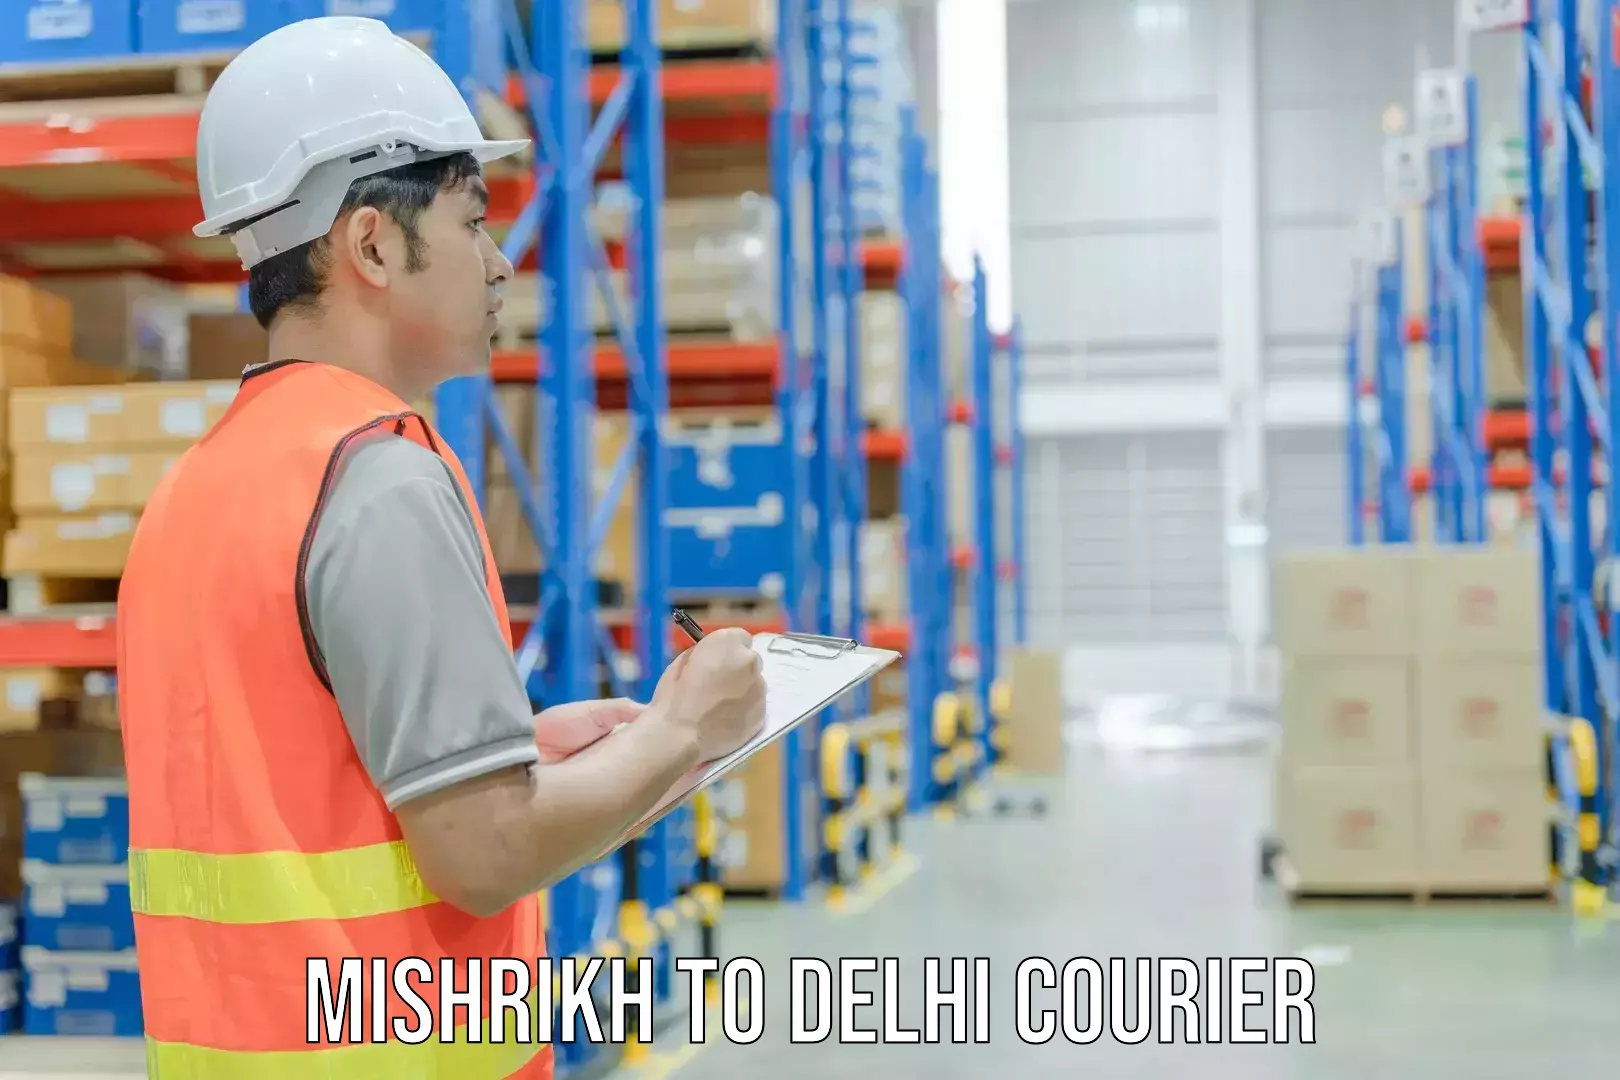 Easy access courier services Mishrikh to Delhi